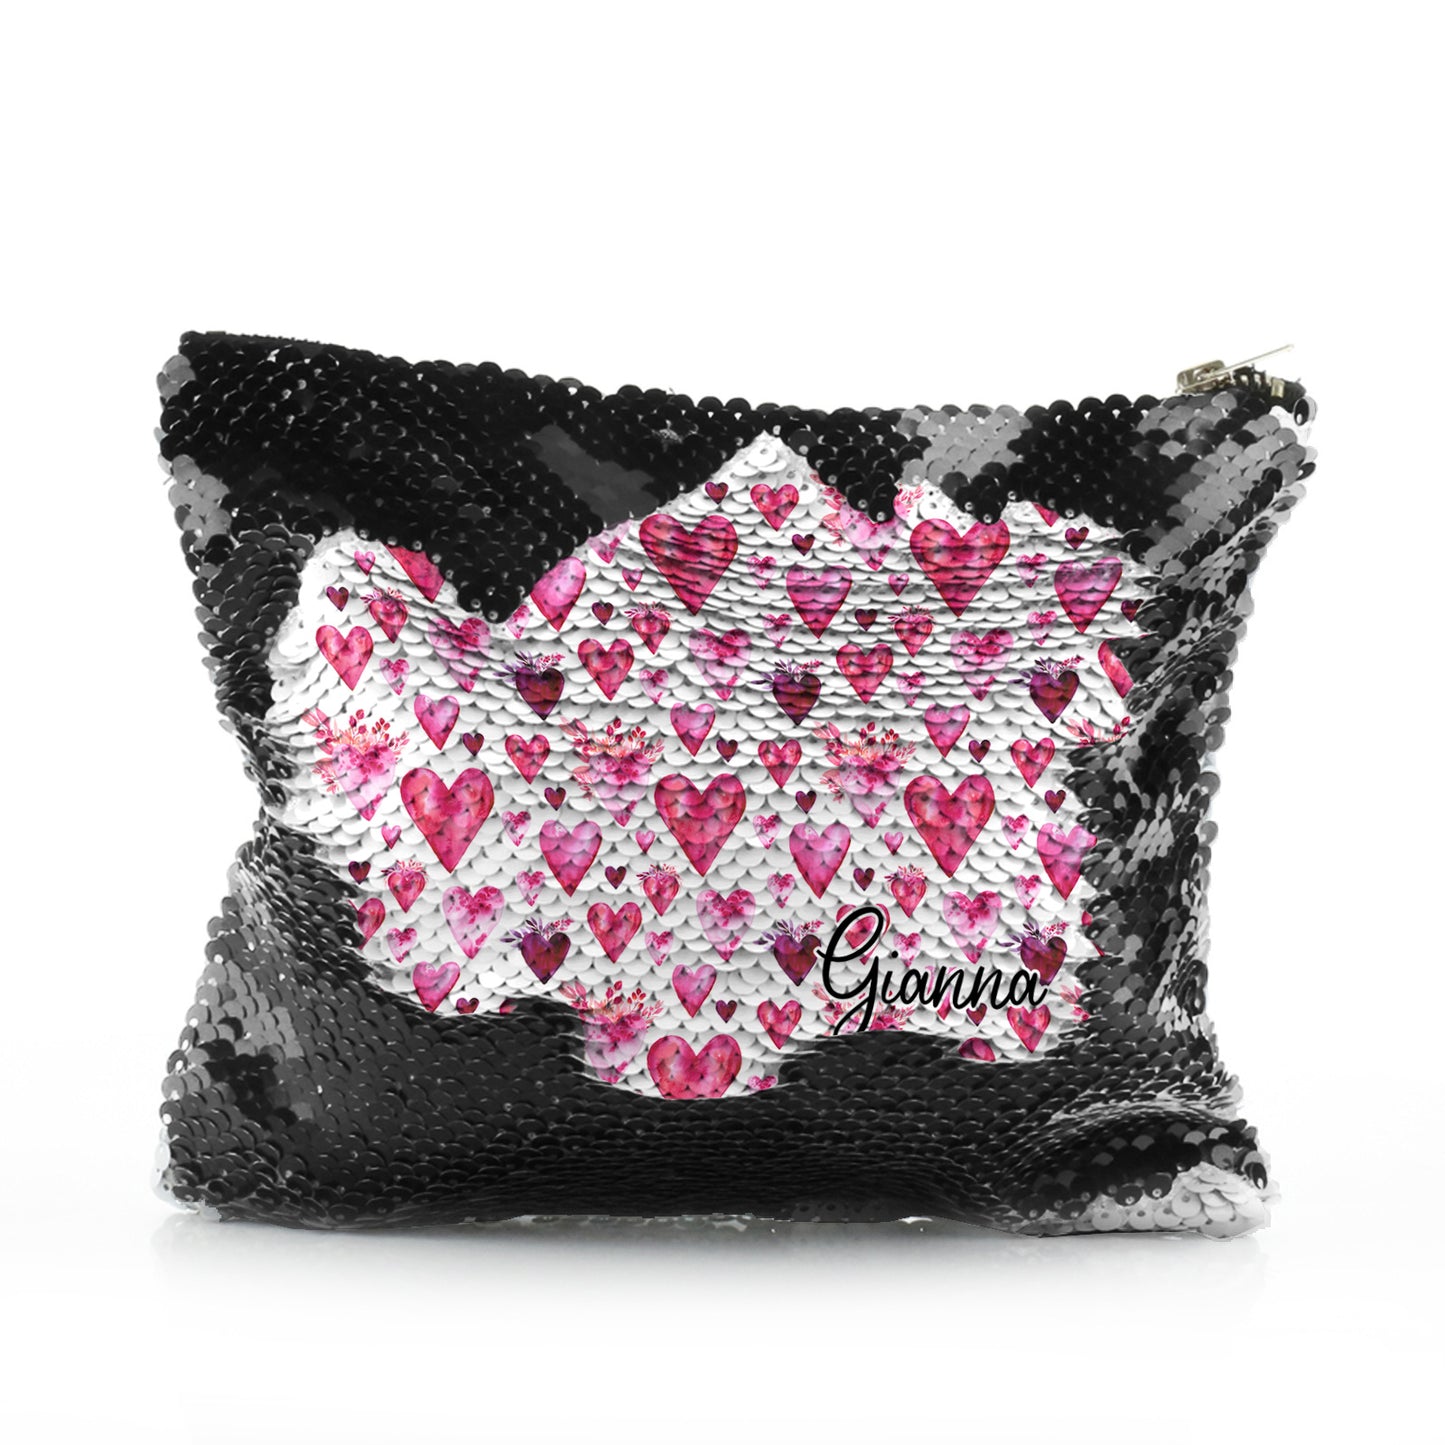 Personalised Sequin Zip Bag with Stylish Text and Valentine Hearts Print